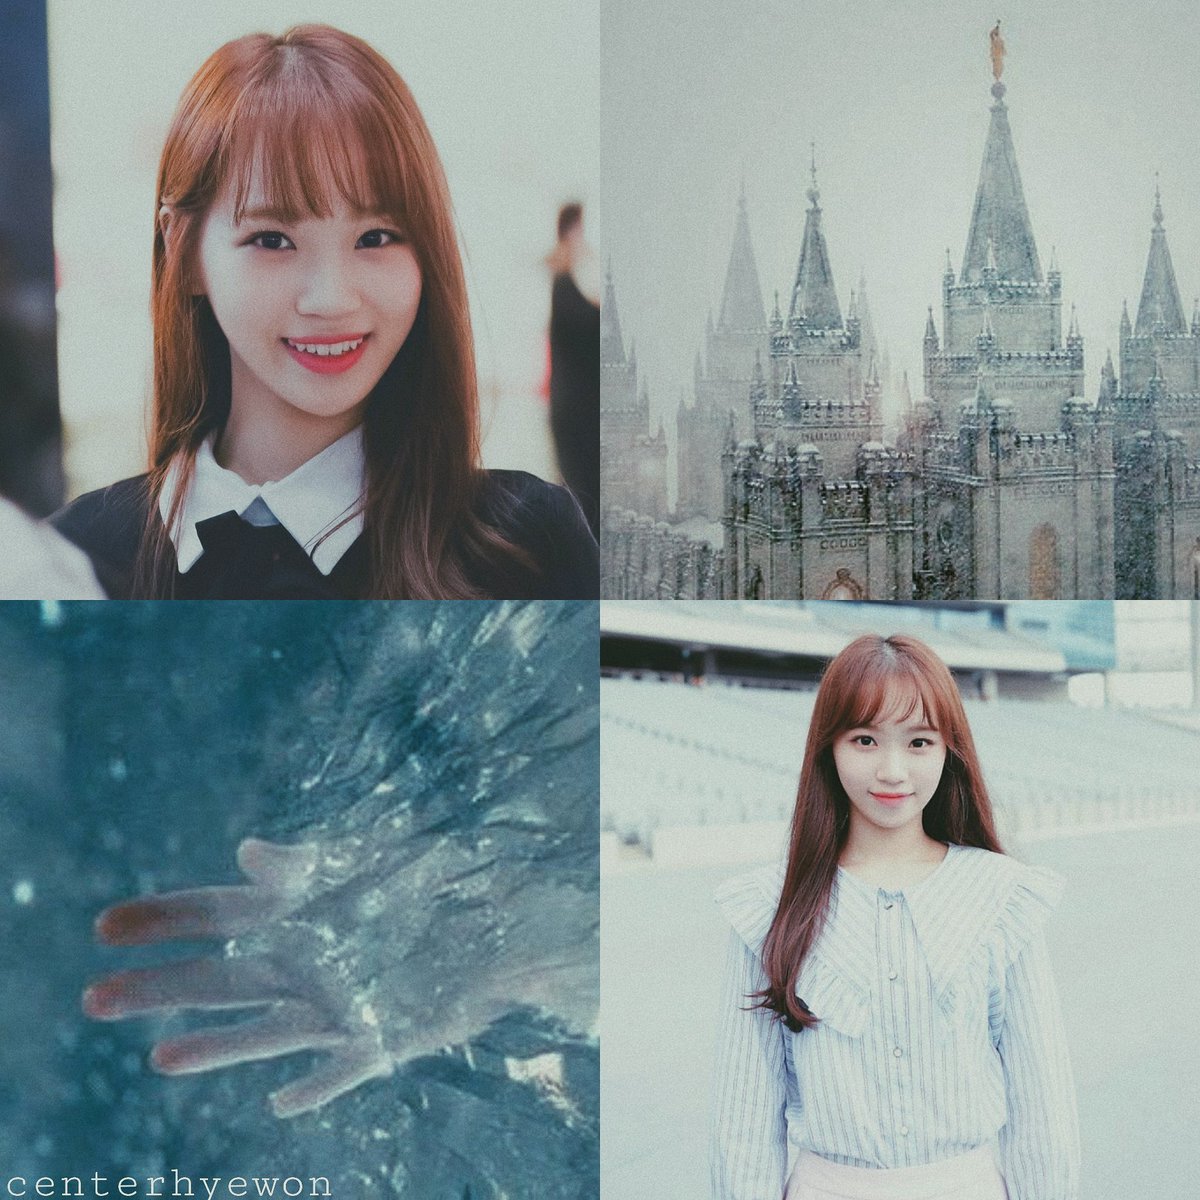 Thread IZ*ONE as Disney Princess! Again, this is my personal opinion and opinions can be different. Please don't reply this thread thankss K [] #IZONE #권은비 #미야와키사쿠라 #강혜원